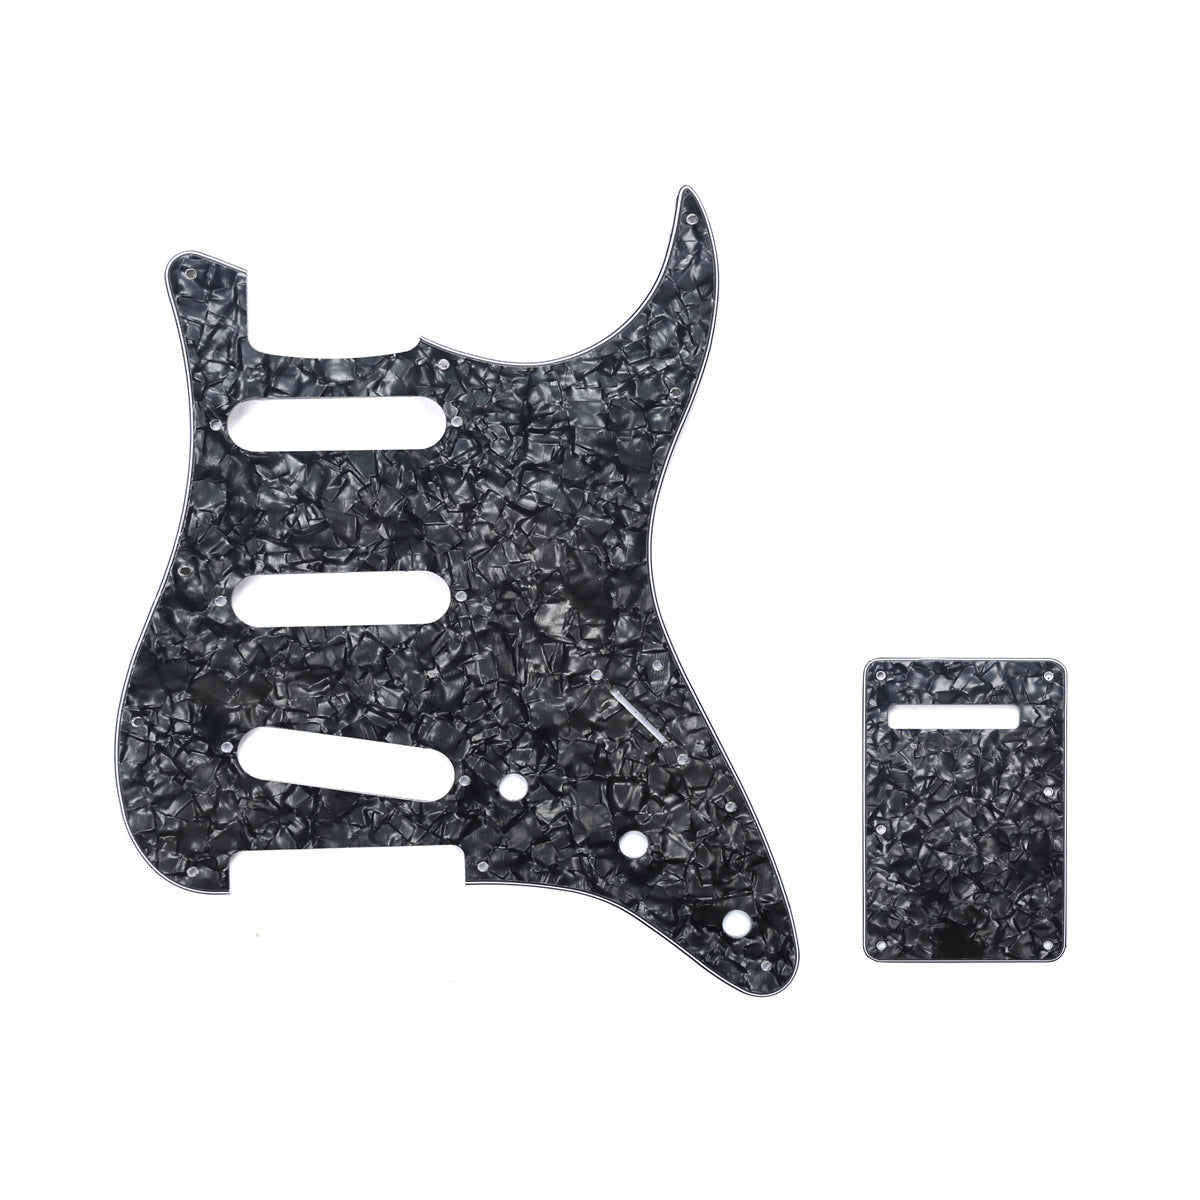 Musiclily SSS 11 Hole Strat Guitar Pickguard and BackPlate Set for Fender USA/Mexican Standard Stratocaster Modern Style, 4Ply Black Pearl